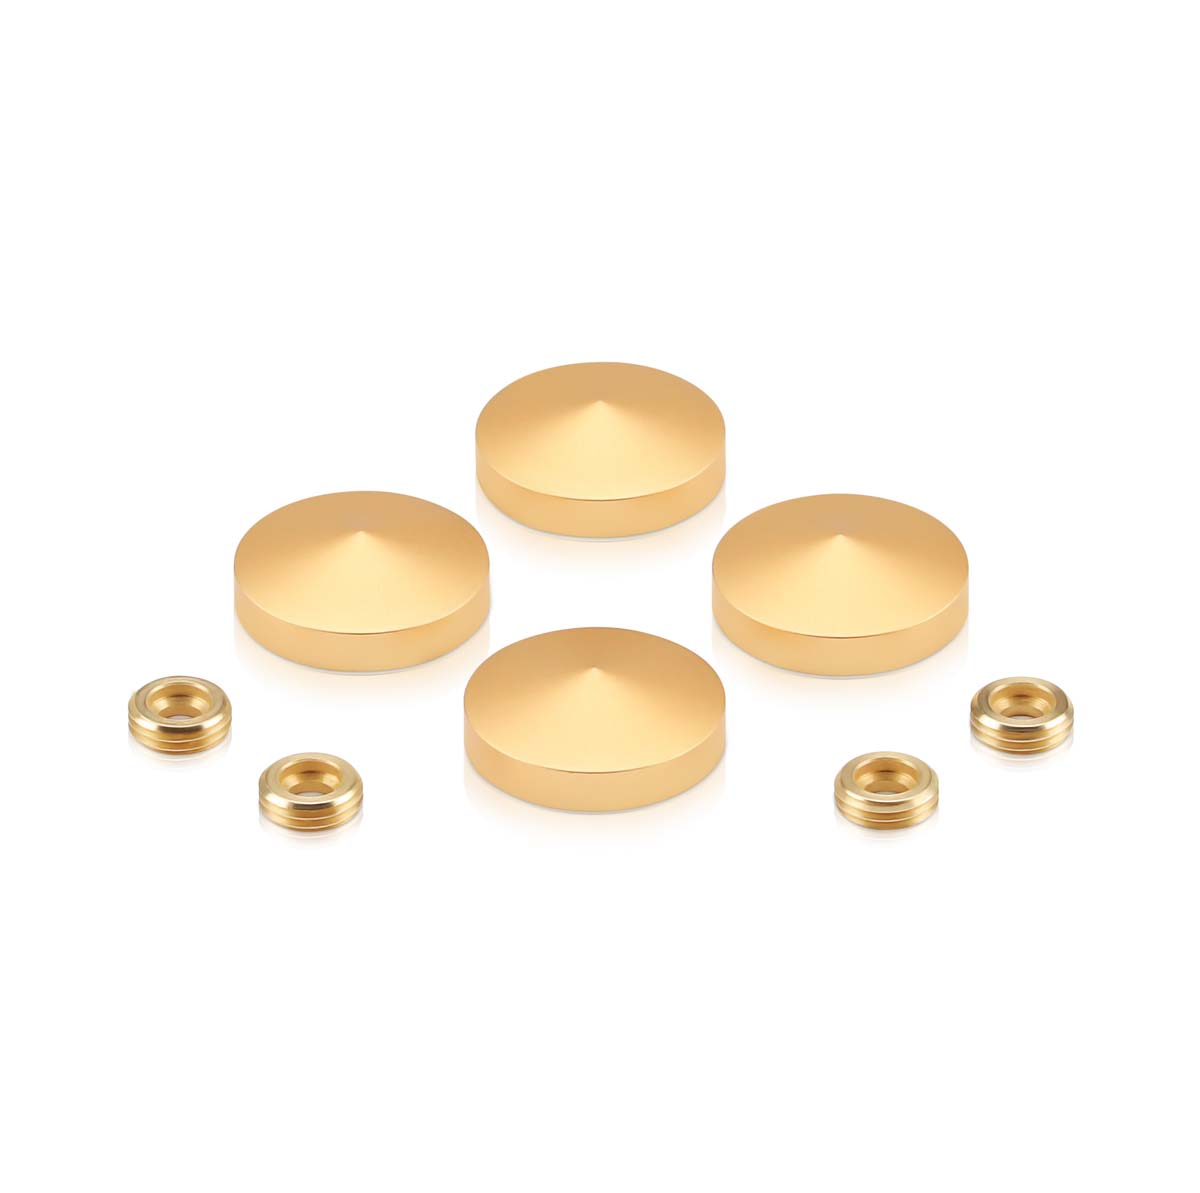 Set of 4 Conical Screw Cover, Diameter: 1'', Aluminum Champagne Anodized Finish (Indoor or Outdoor Use)